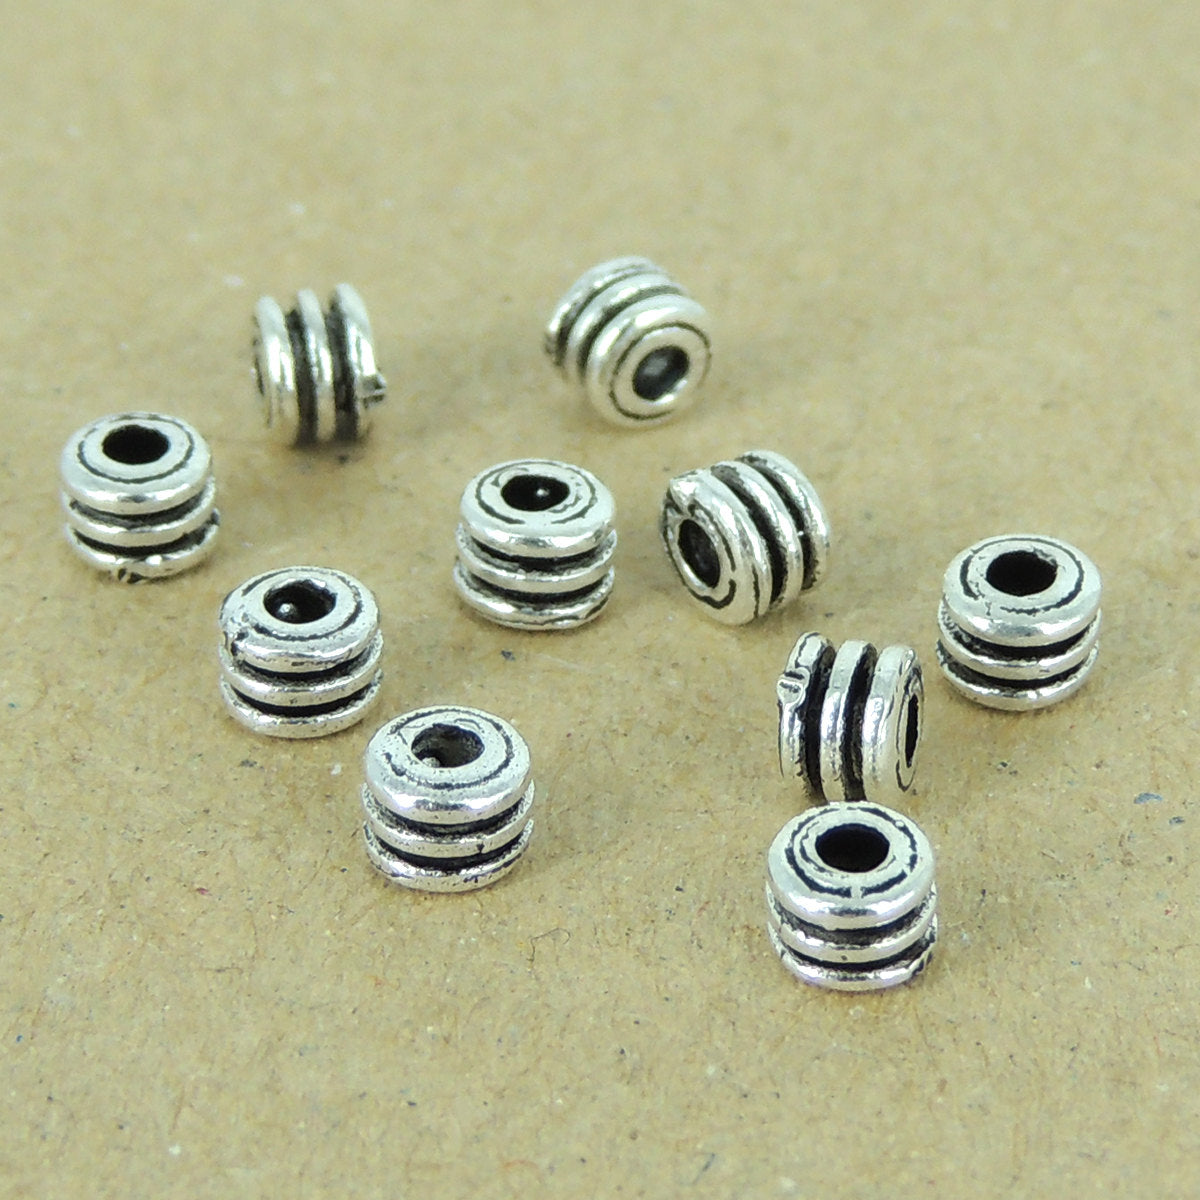 Genuine Sterling Silver Wheel Spacer Beads for Jewelry Making